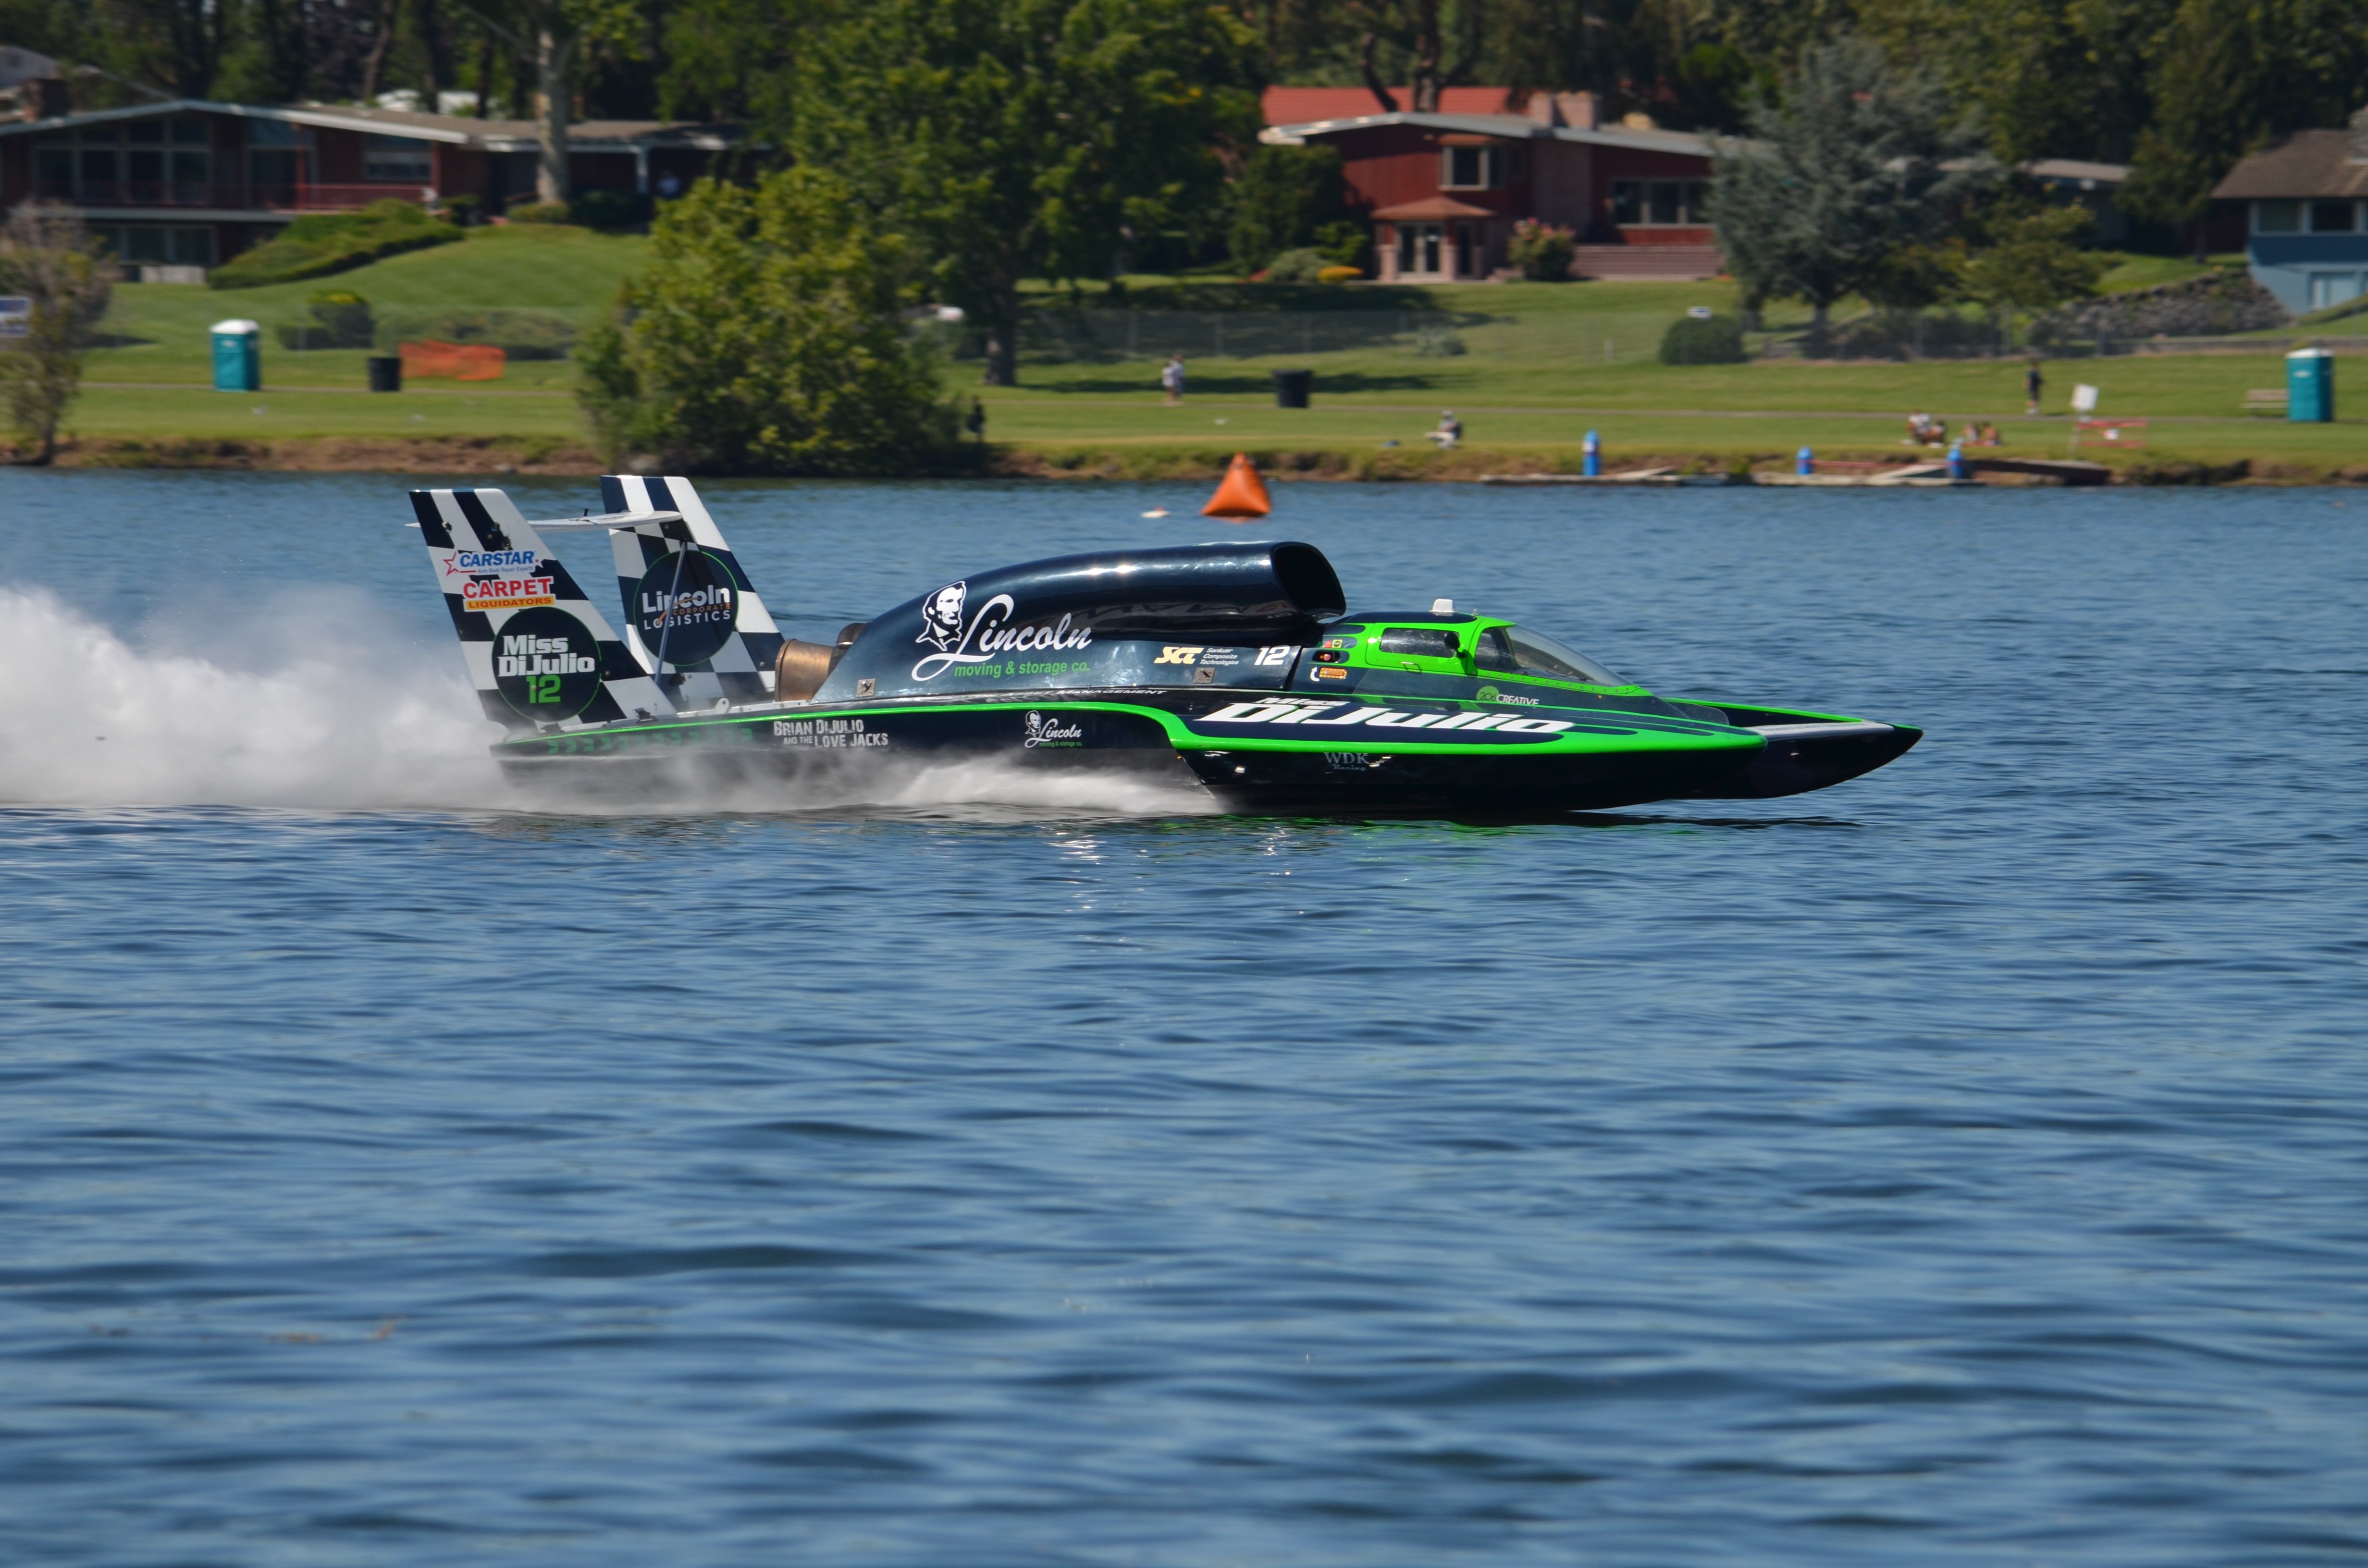 unlimited hydroplane, Race, Racing, Boat, Ship, Unlimited, Hydroplane, Jet,  6 Wallpaper